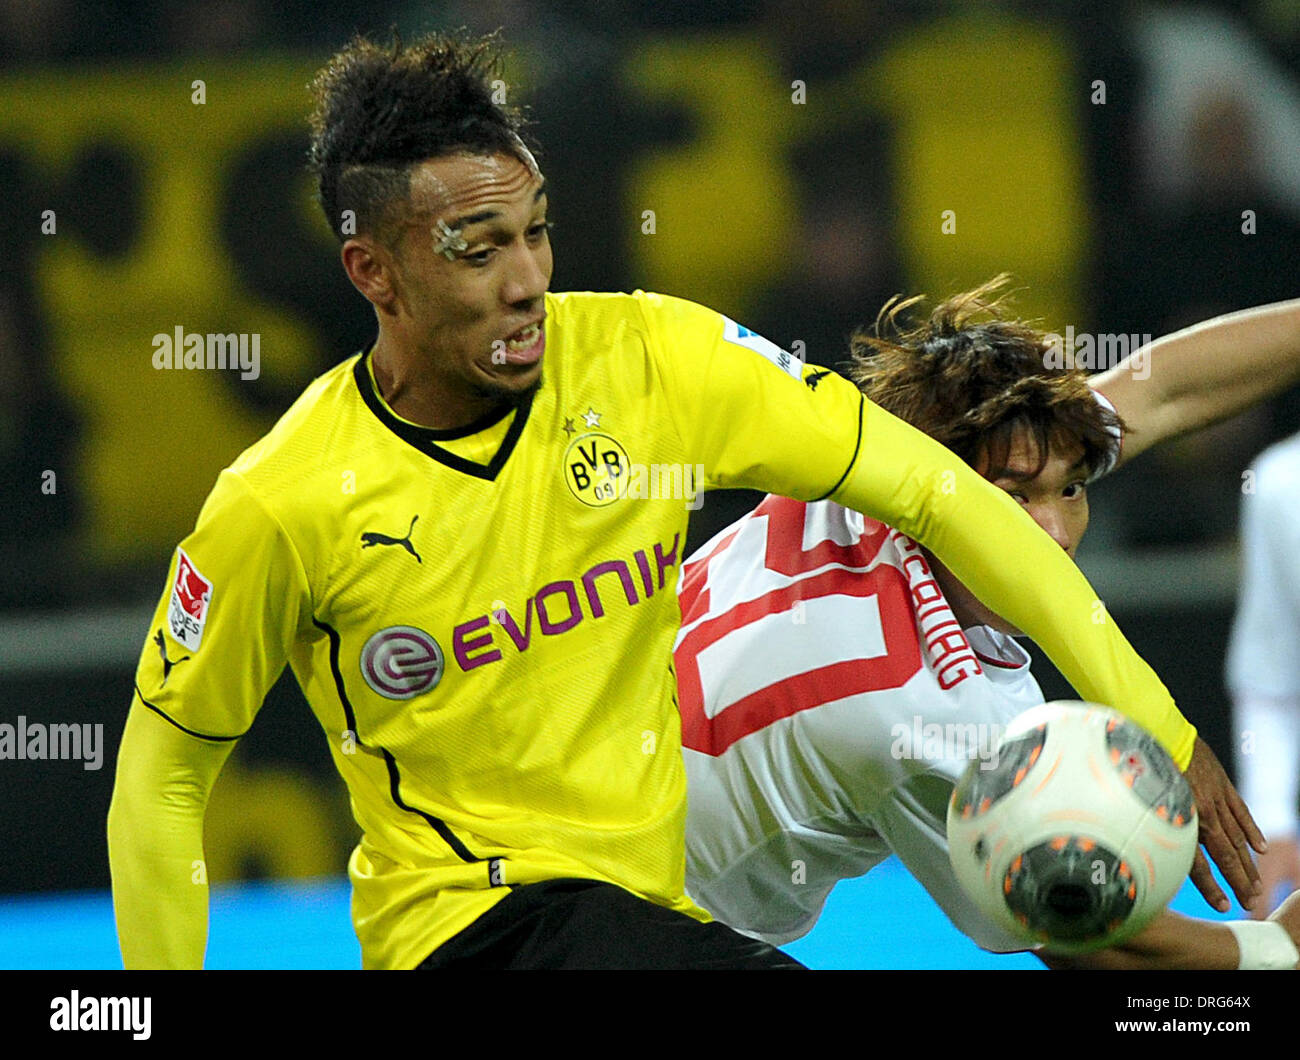 Dortmund, Germany. 25th Jan, 2014. Dortmund's Pierre-Emerick Aubameyang (L) and Augsburg's Jeong-Ho Hong vie for the ball during the German Bundesliga soccer match between Borussia Dortmund and FC Augsburg at the SignalIdunaPark in Dortmund, Germany, 25 January 2014. Photo: JAN-PHILIPP STROBEL (ATTENTION: Due to the accreditation guidelines, the DFL only permits the publication and utilisation of up to 15 pictures per match on the internet and in online media during the match.)/dpa/Alamy Live News Stock Photo